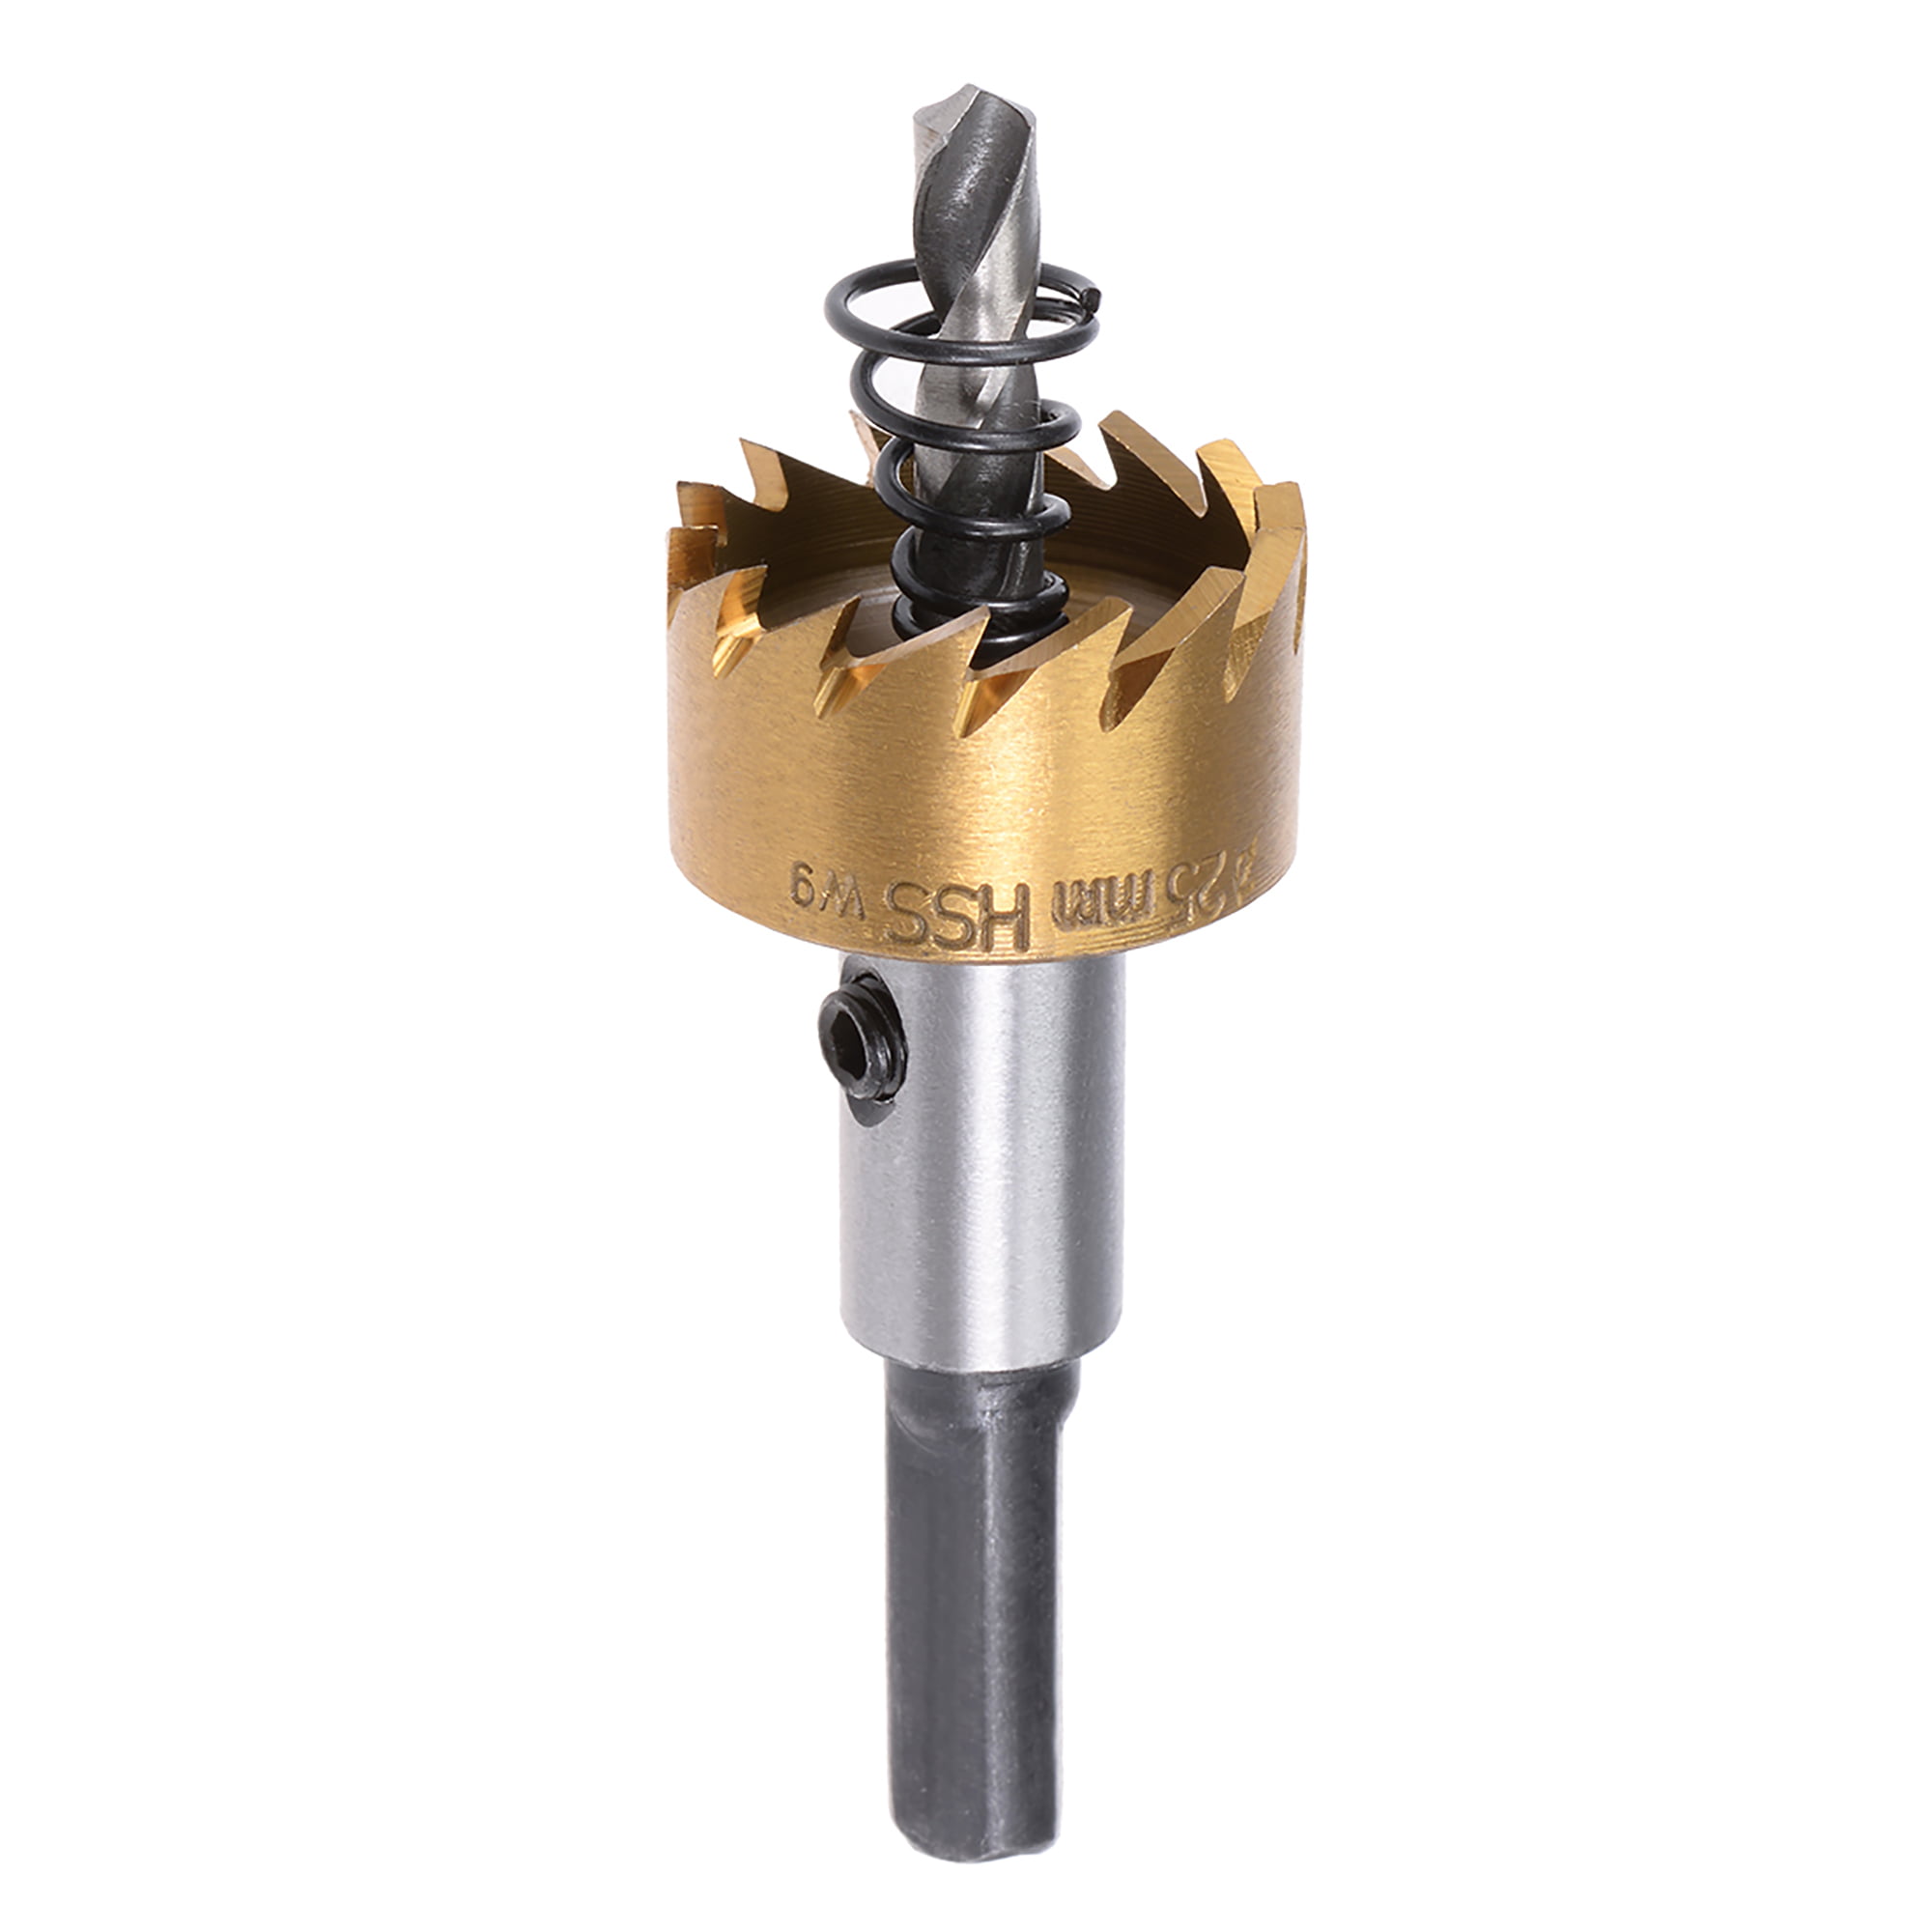 21mm HSS Drill Bit Hole Saw Tooth Stainless Steel Metal Alloy Cutter Tool 